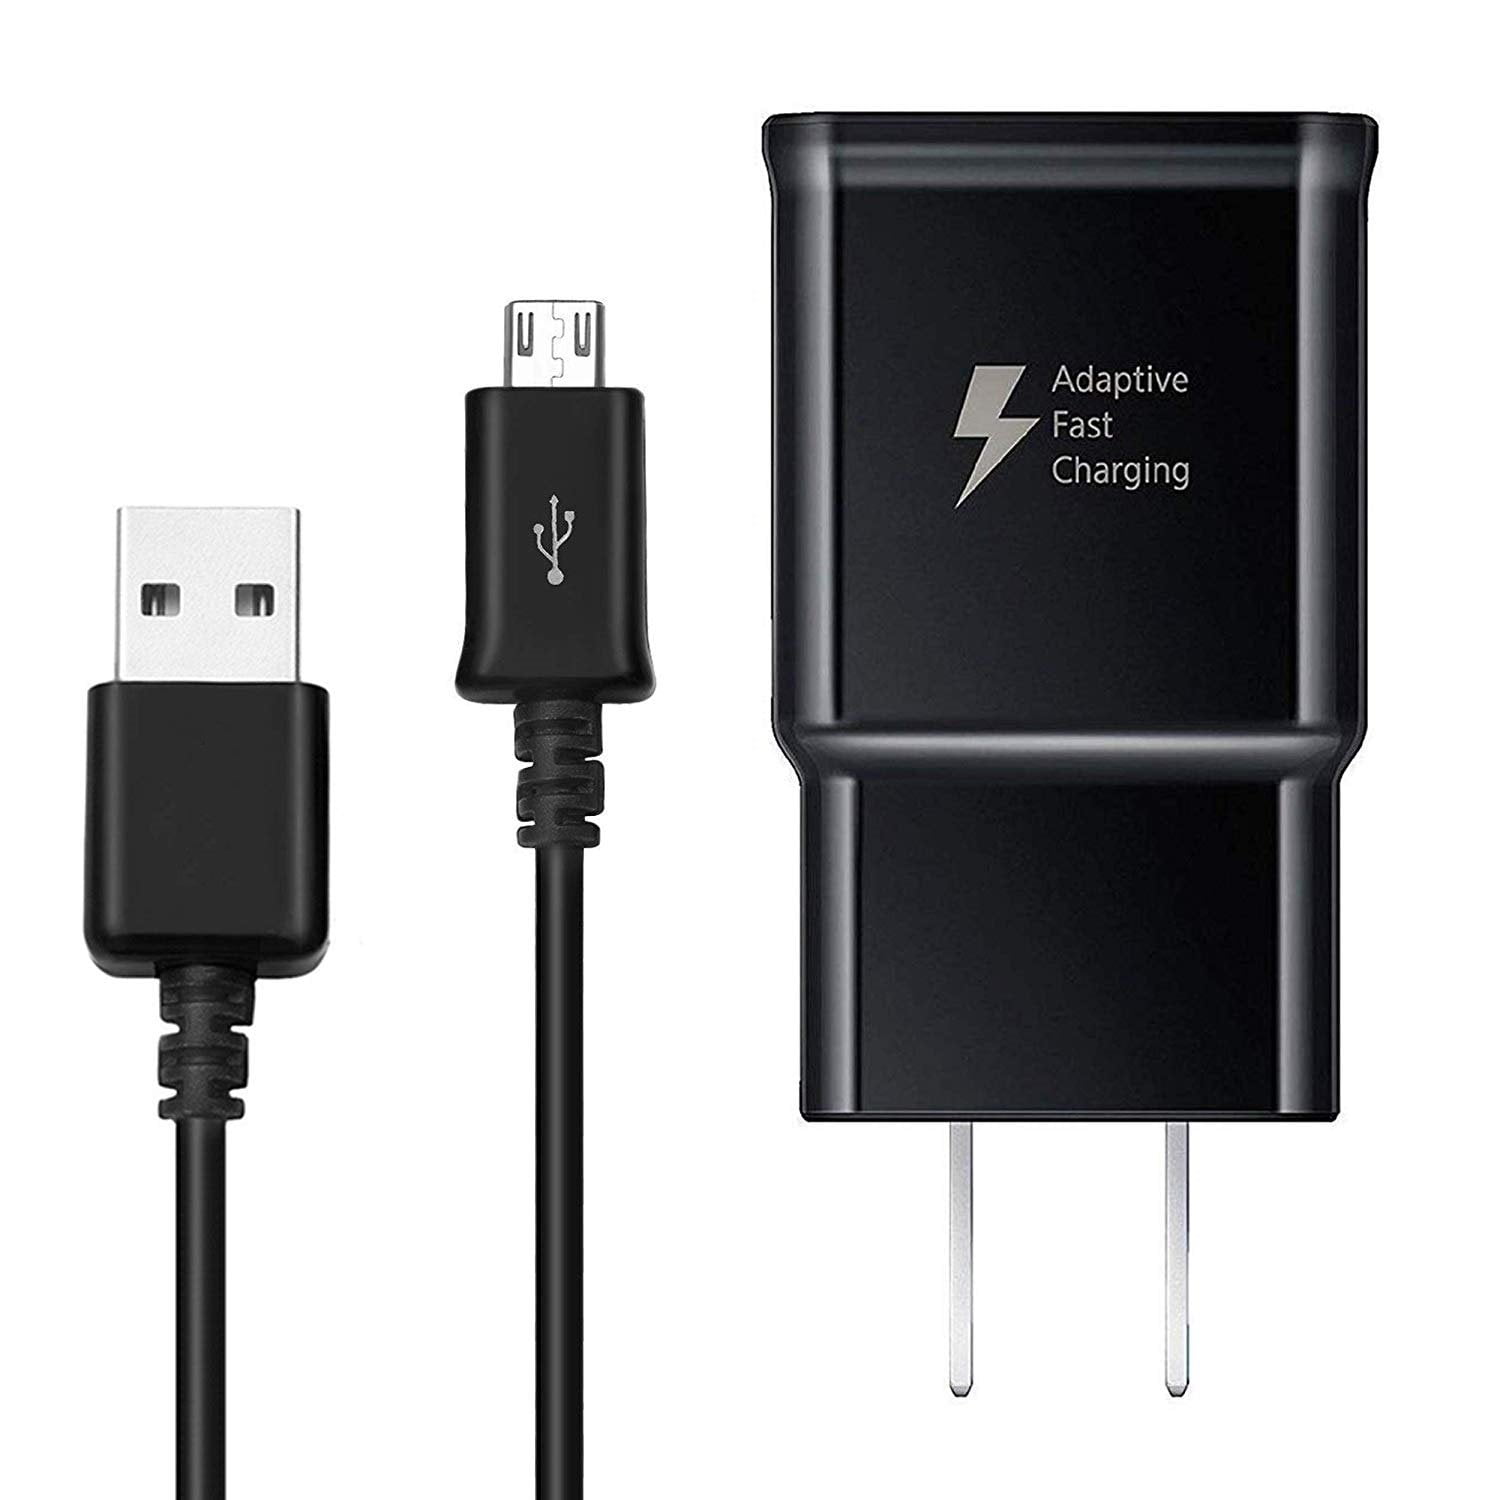 Samsung Galaxy S5 mini Adaptive Fast Charger Micro USB 2.0 Charging Kit [1 Charger + 5 FT USB Cable] Dual voltages for up to Faster Charging! Black - Walmart.com